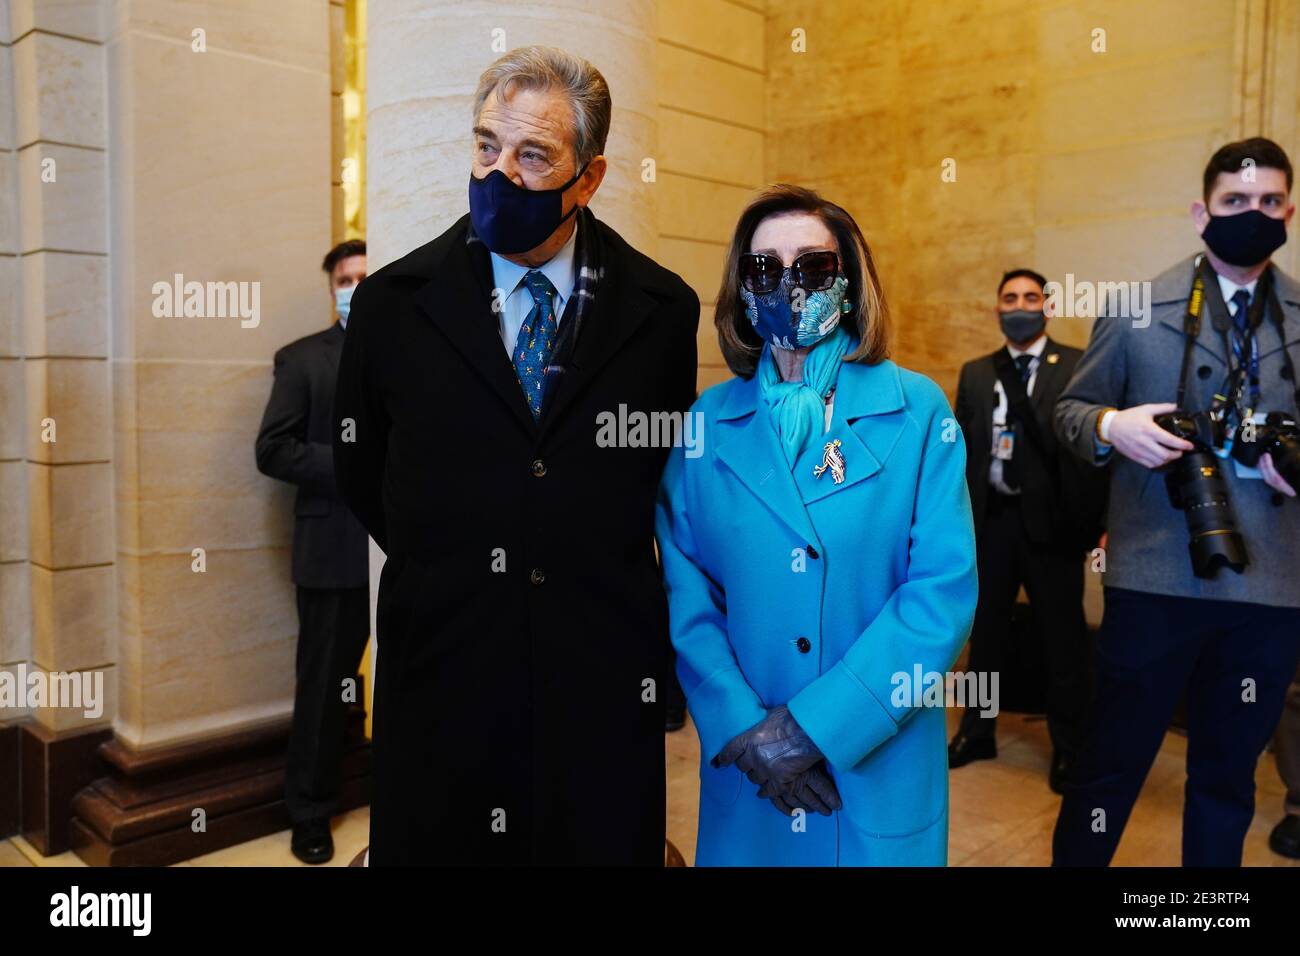 Speaker of the House Nancy Pelosi (R) and her husband Paul (L) before President-elect Joe Biden arrives at the East Front of the US Capitol for his inauguration ceremony to be the 46th President of the United States in Washington, DC, USA, 20 January 2021./MediaPunch Stock Photo